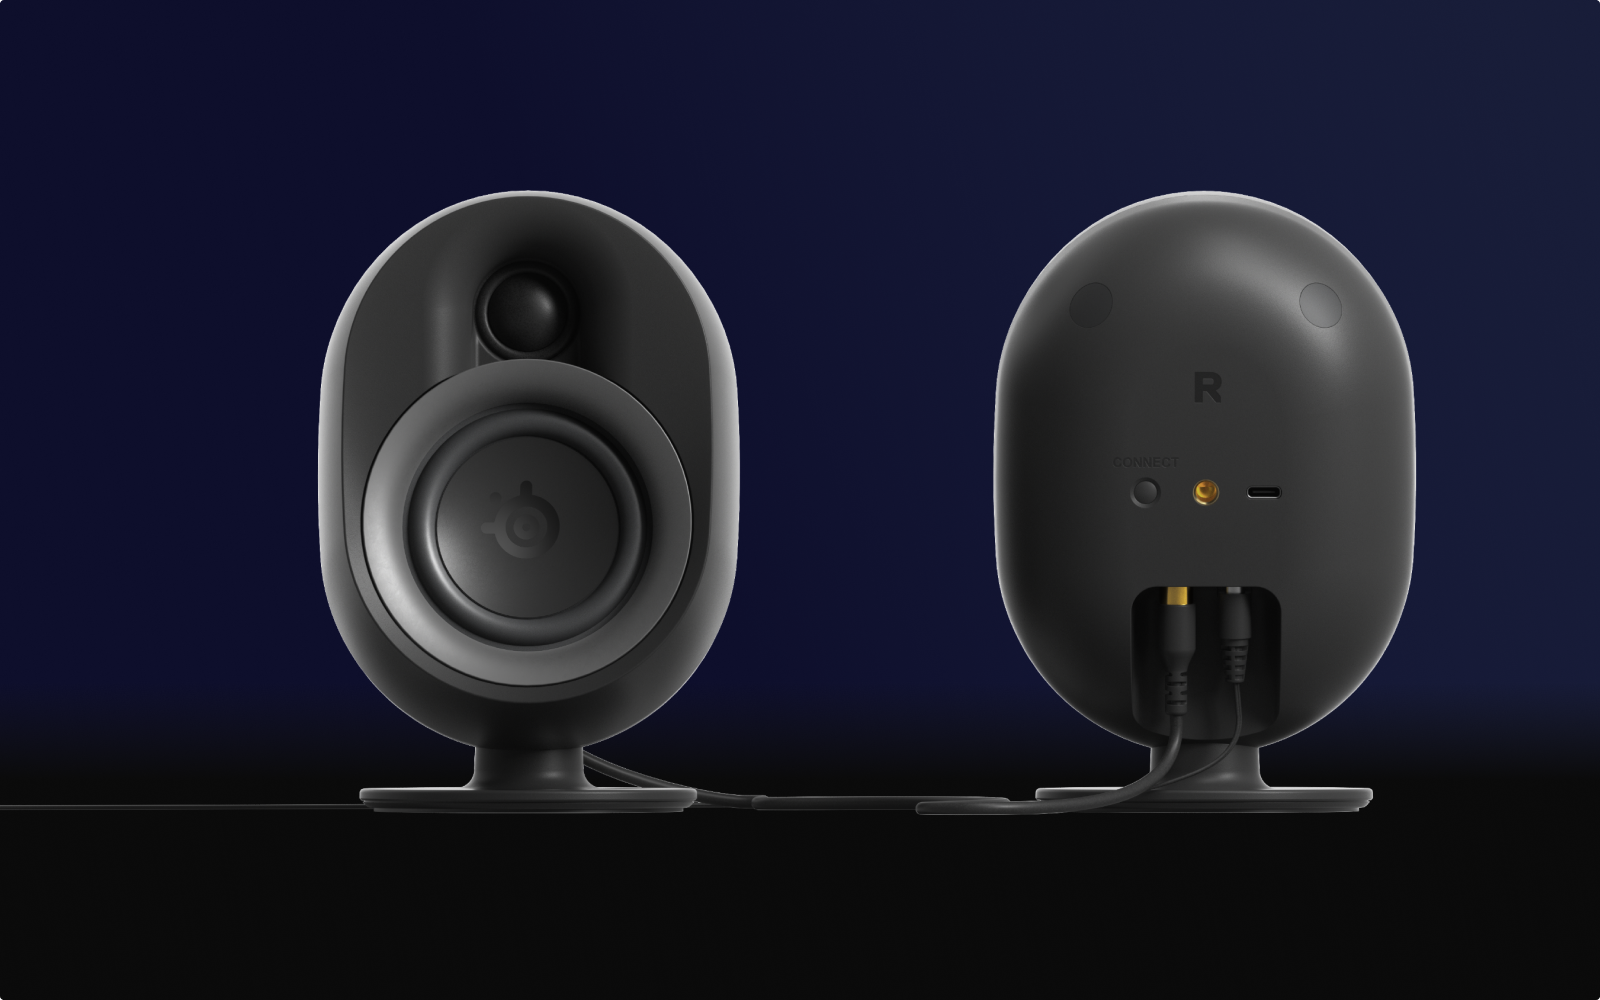 A direct shot of the Arena 9 wireless rear speakers.